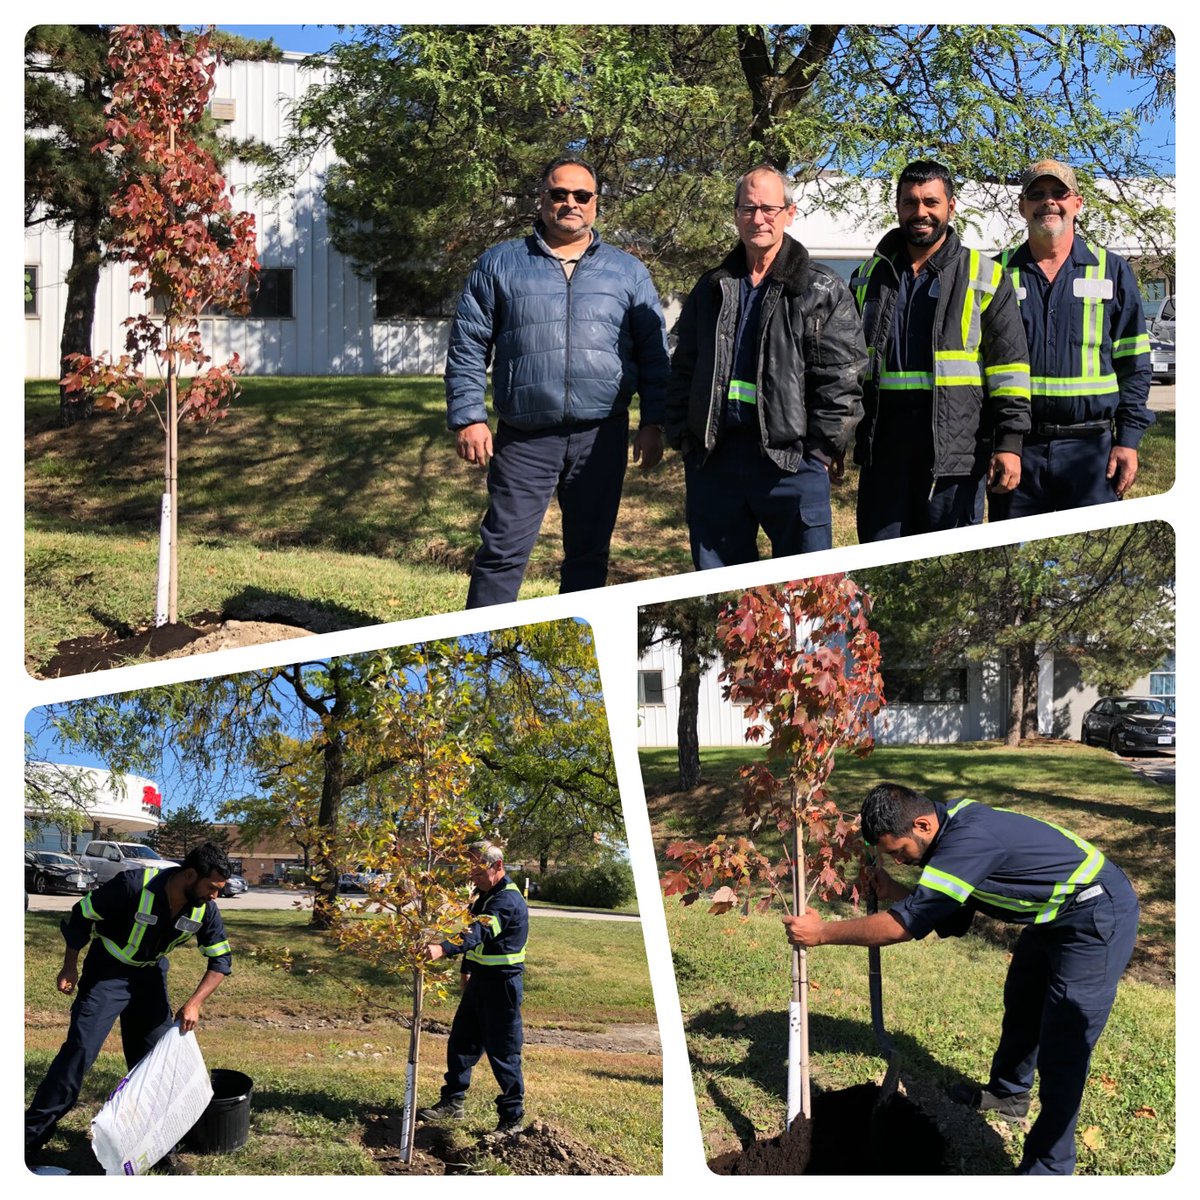 Our Internal Tree Planting Program started this fall across the country and today we thank our Brampton Facility team for their joy and participation on this initiative!

#treeplanting #brampton #mcasphalt #environment